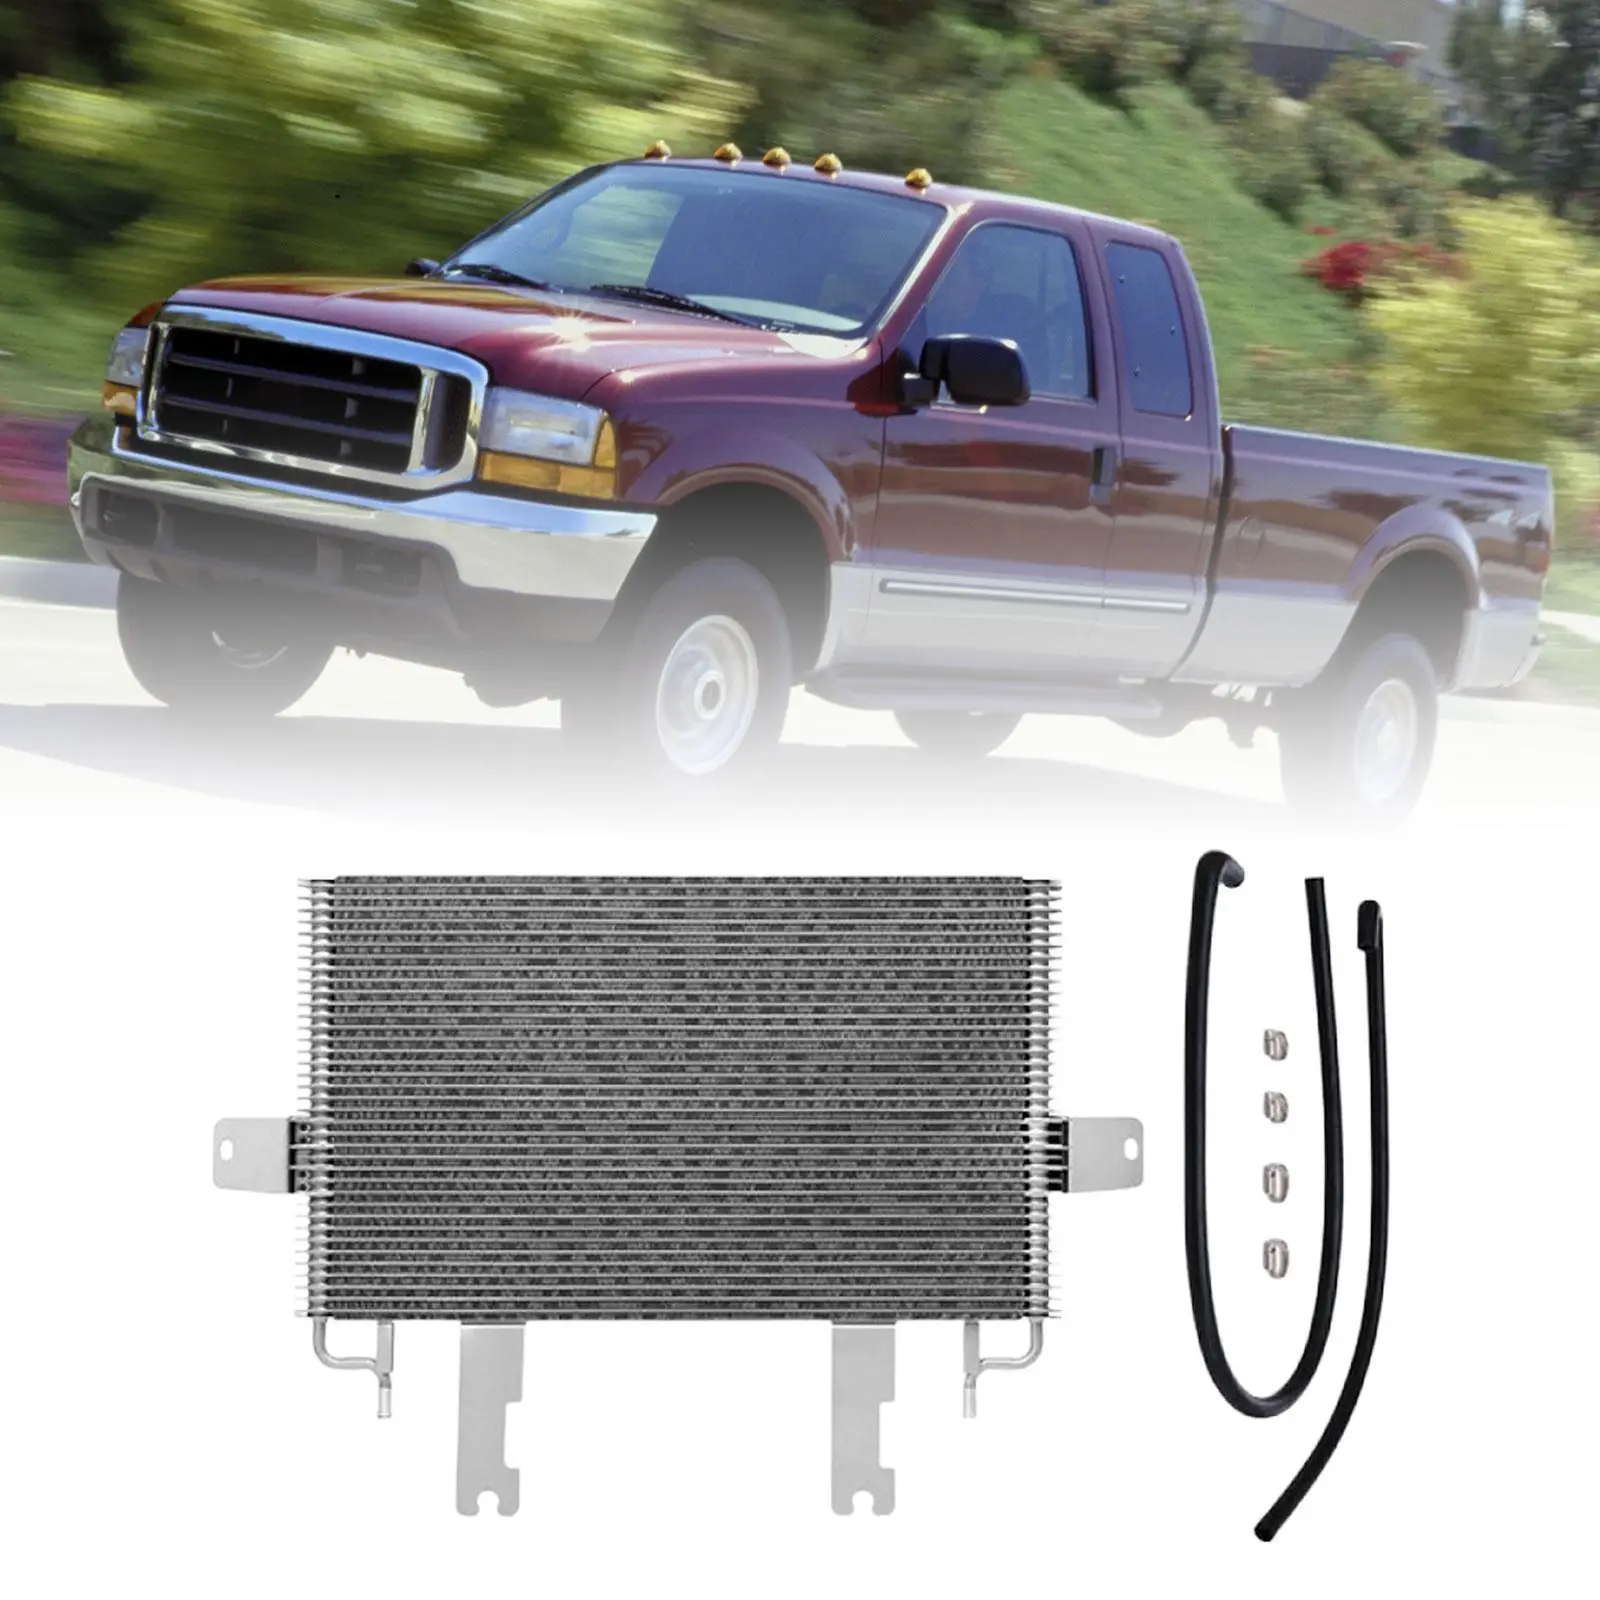 Transmission Cooler for 7.3L Powerstroke Stable Performance Quality